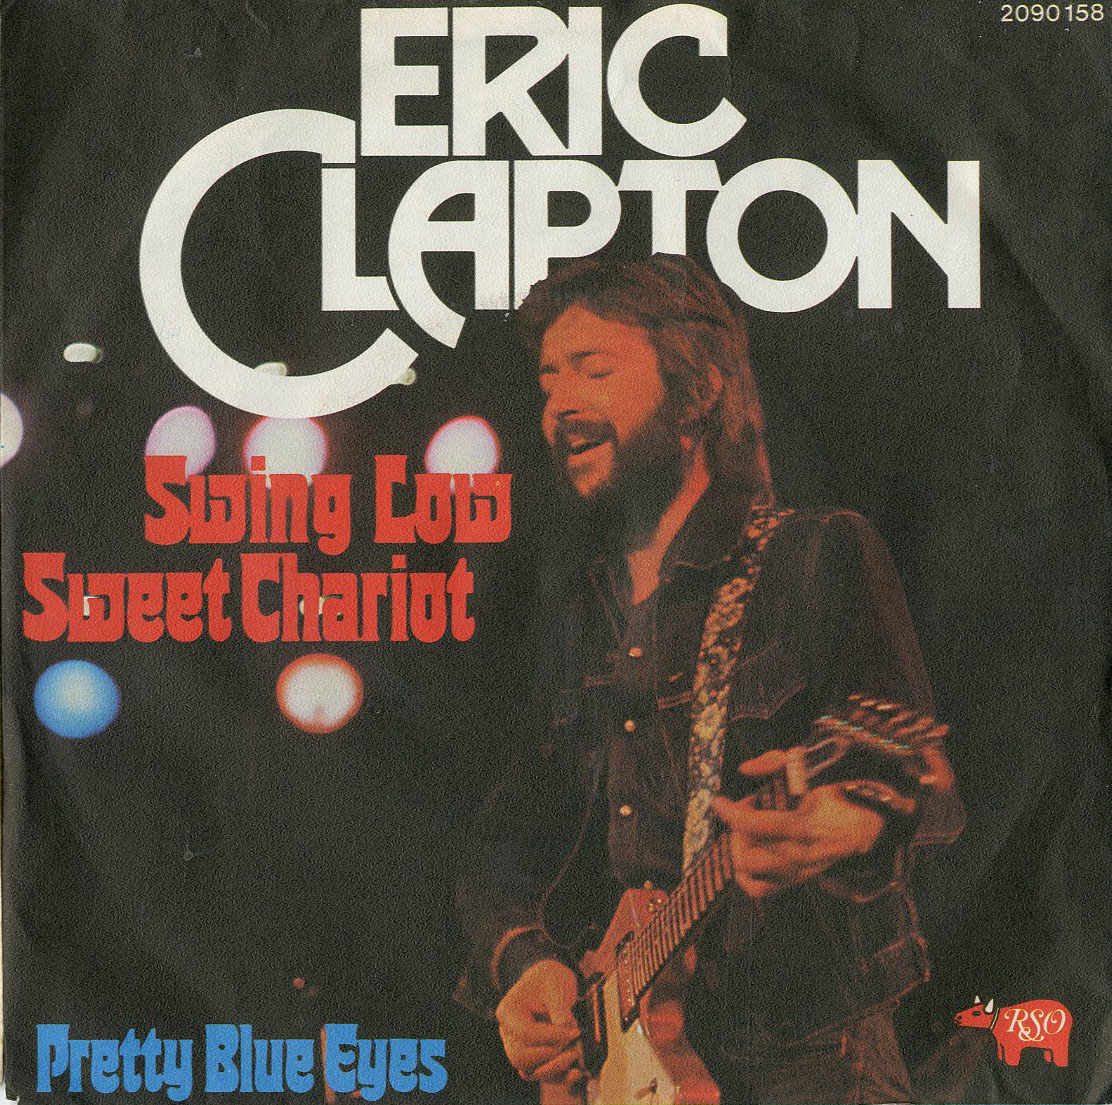 Albumcover Eric Clapton - Swing Low Sweet Chariot / Pretty Blue Eyes